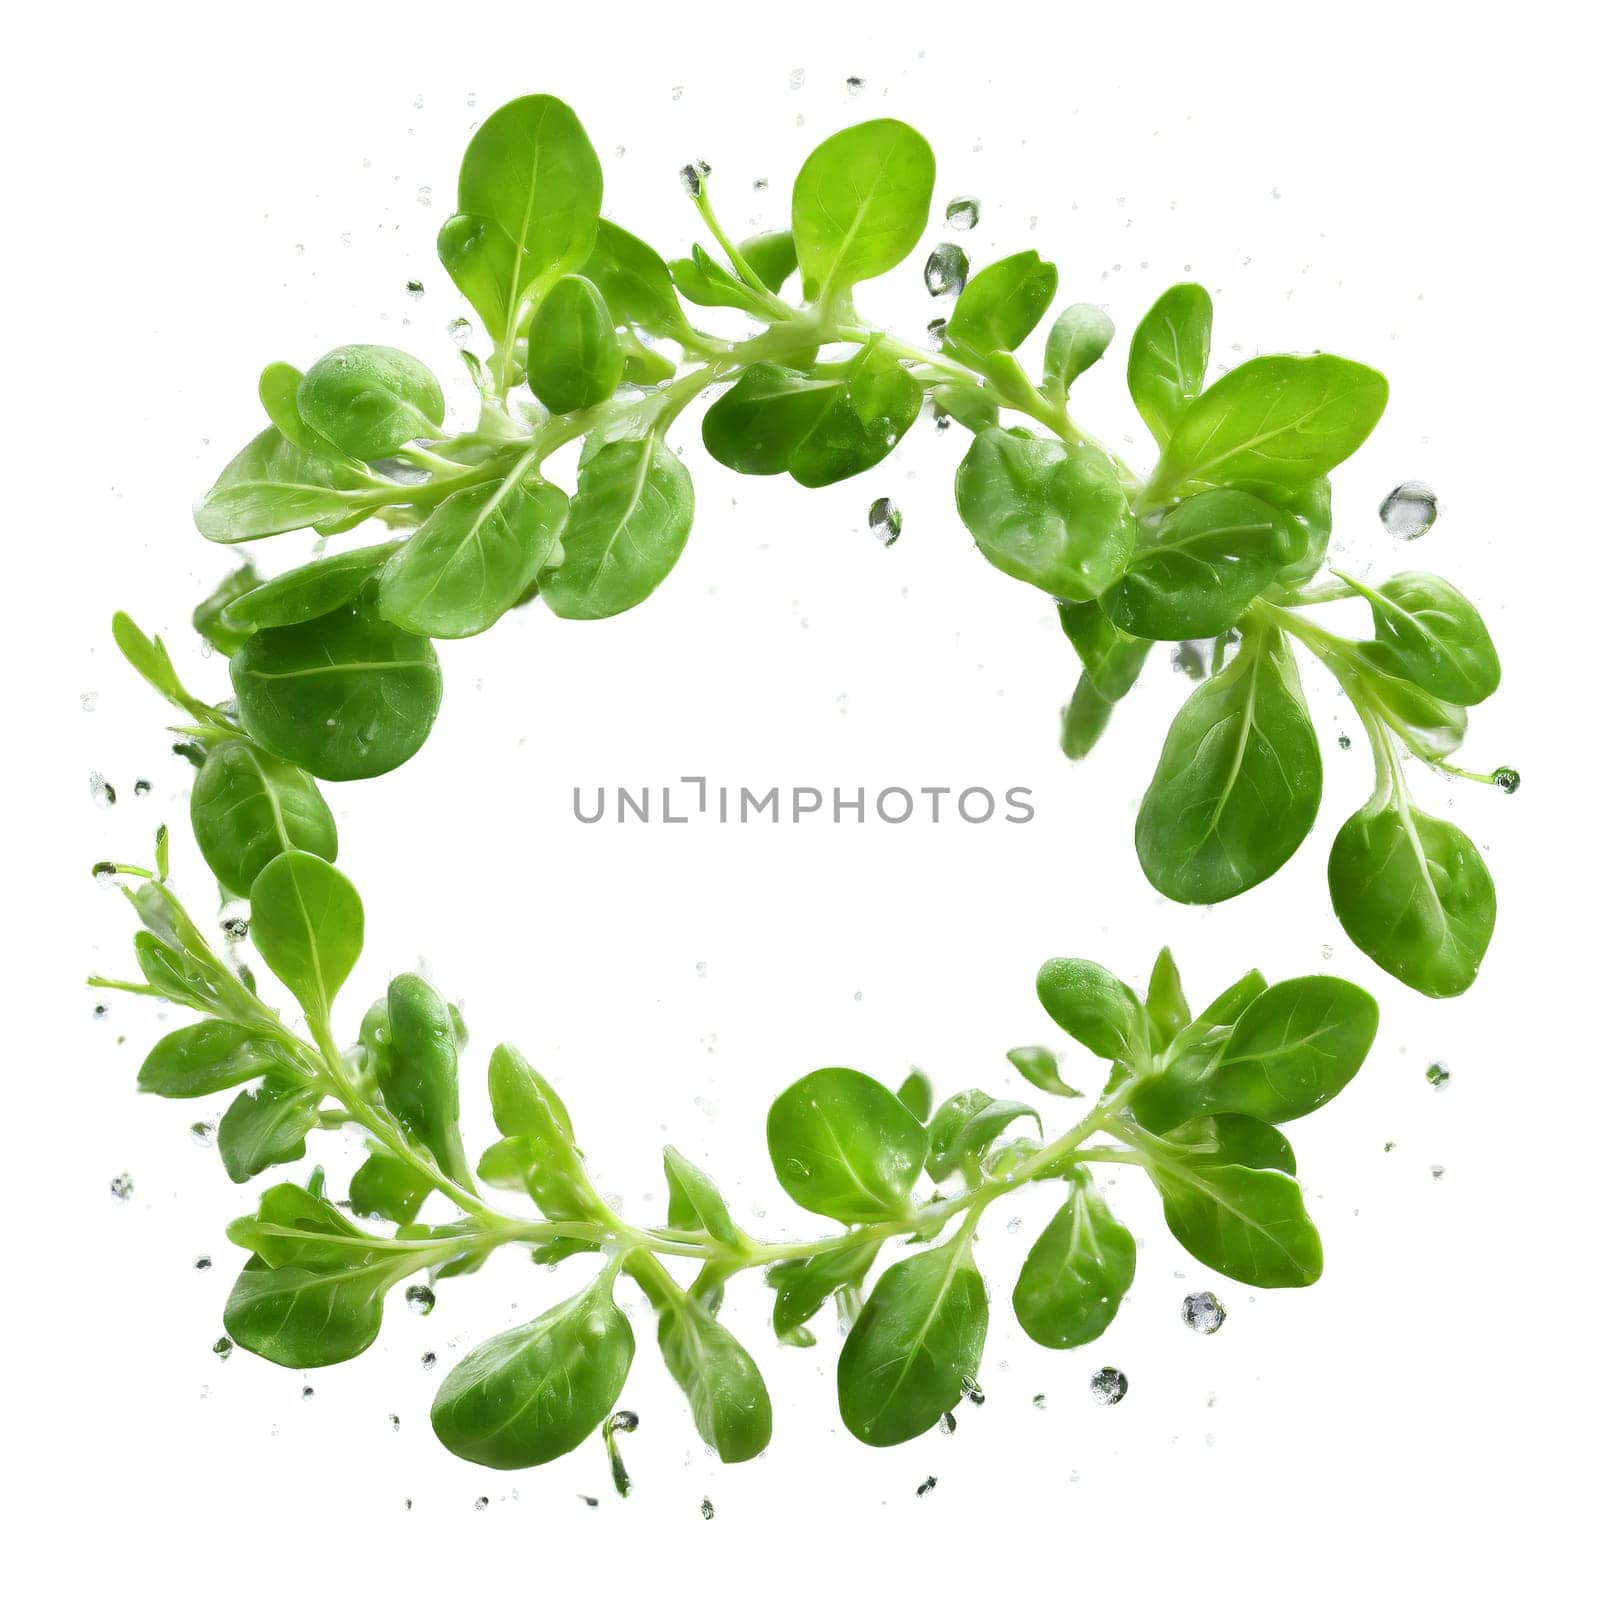 Fresh arugula leaves spinning water droplets splashing stems twirling Eruca vesicaria Food and Culinary concept by panophotograph